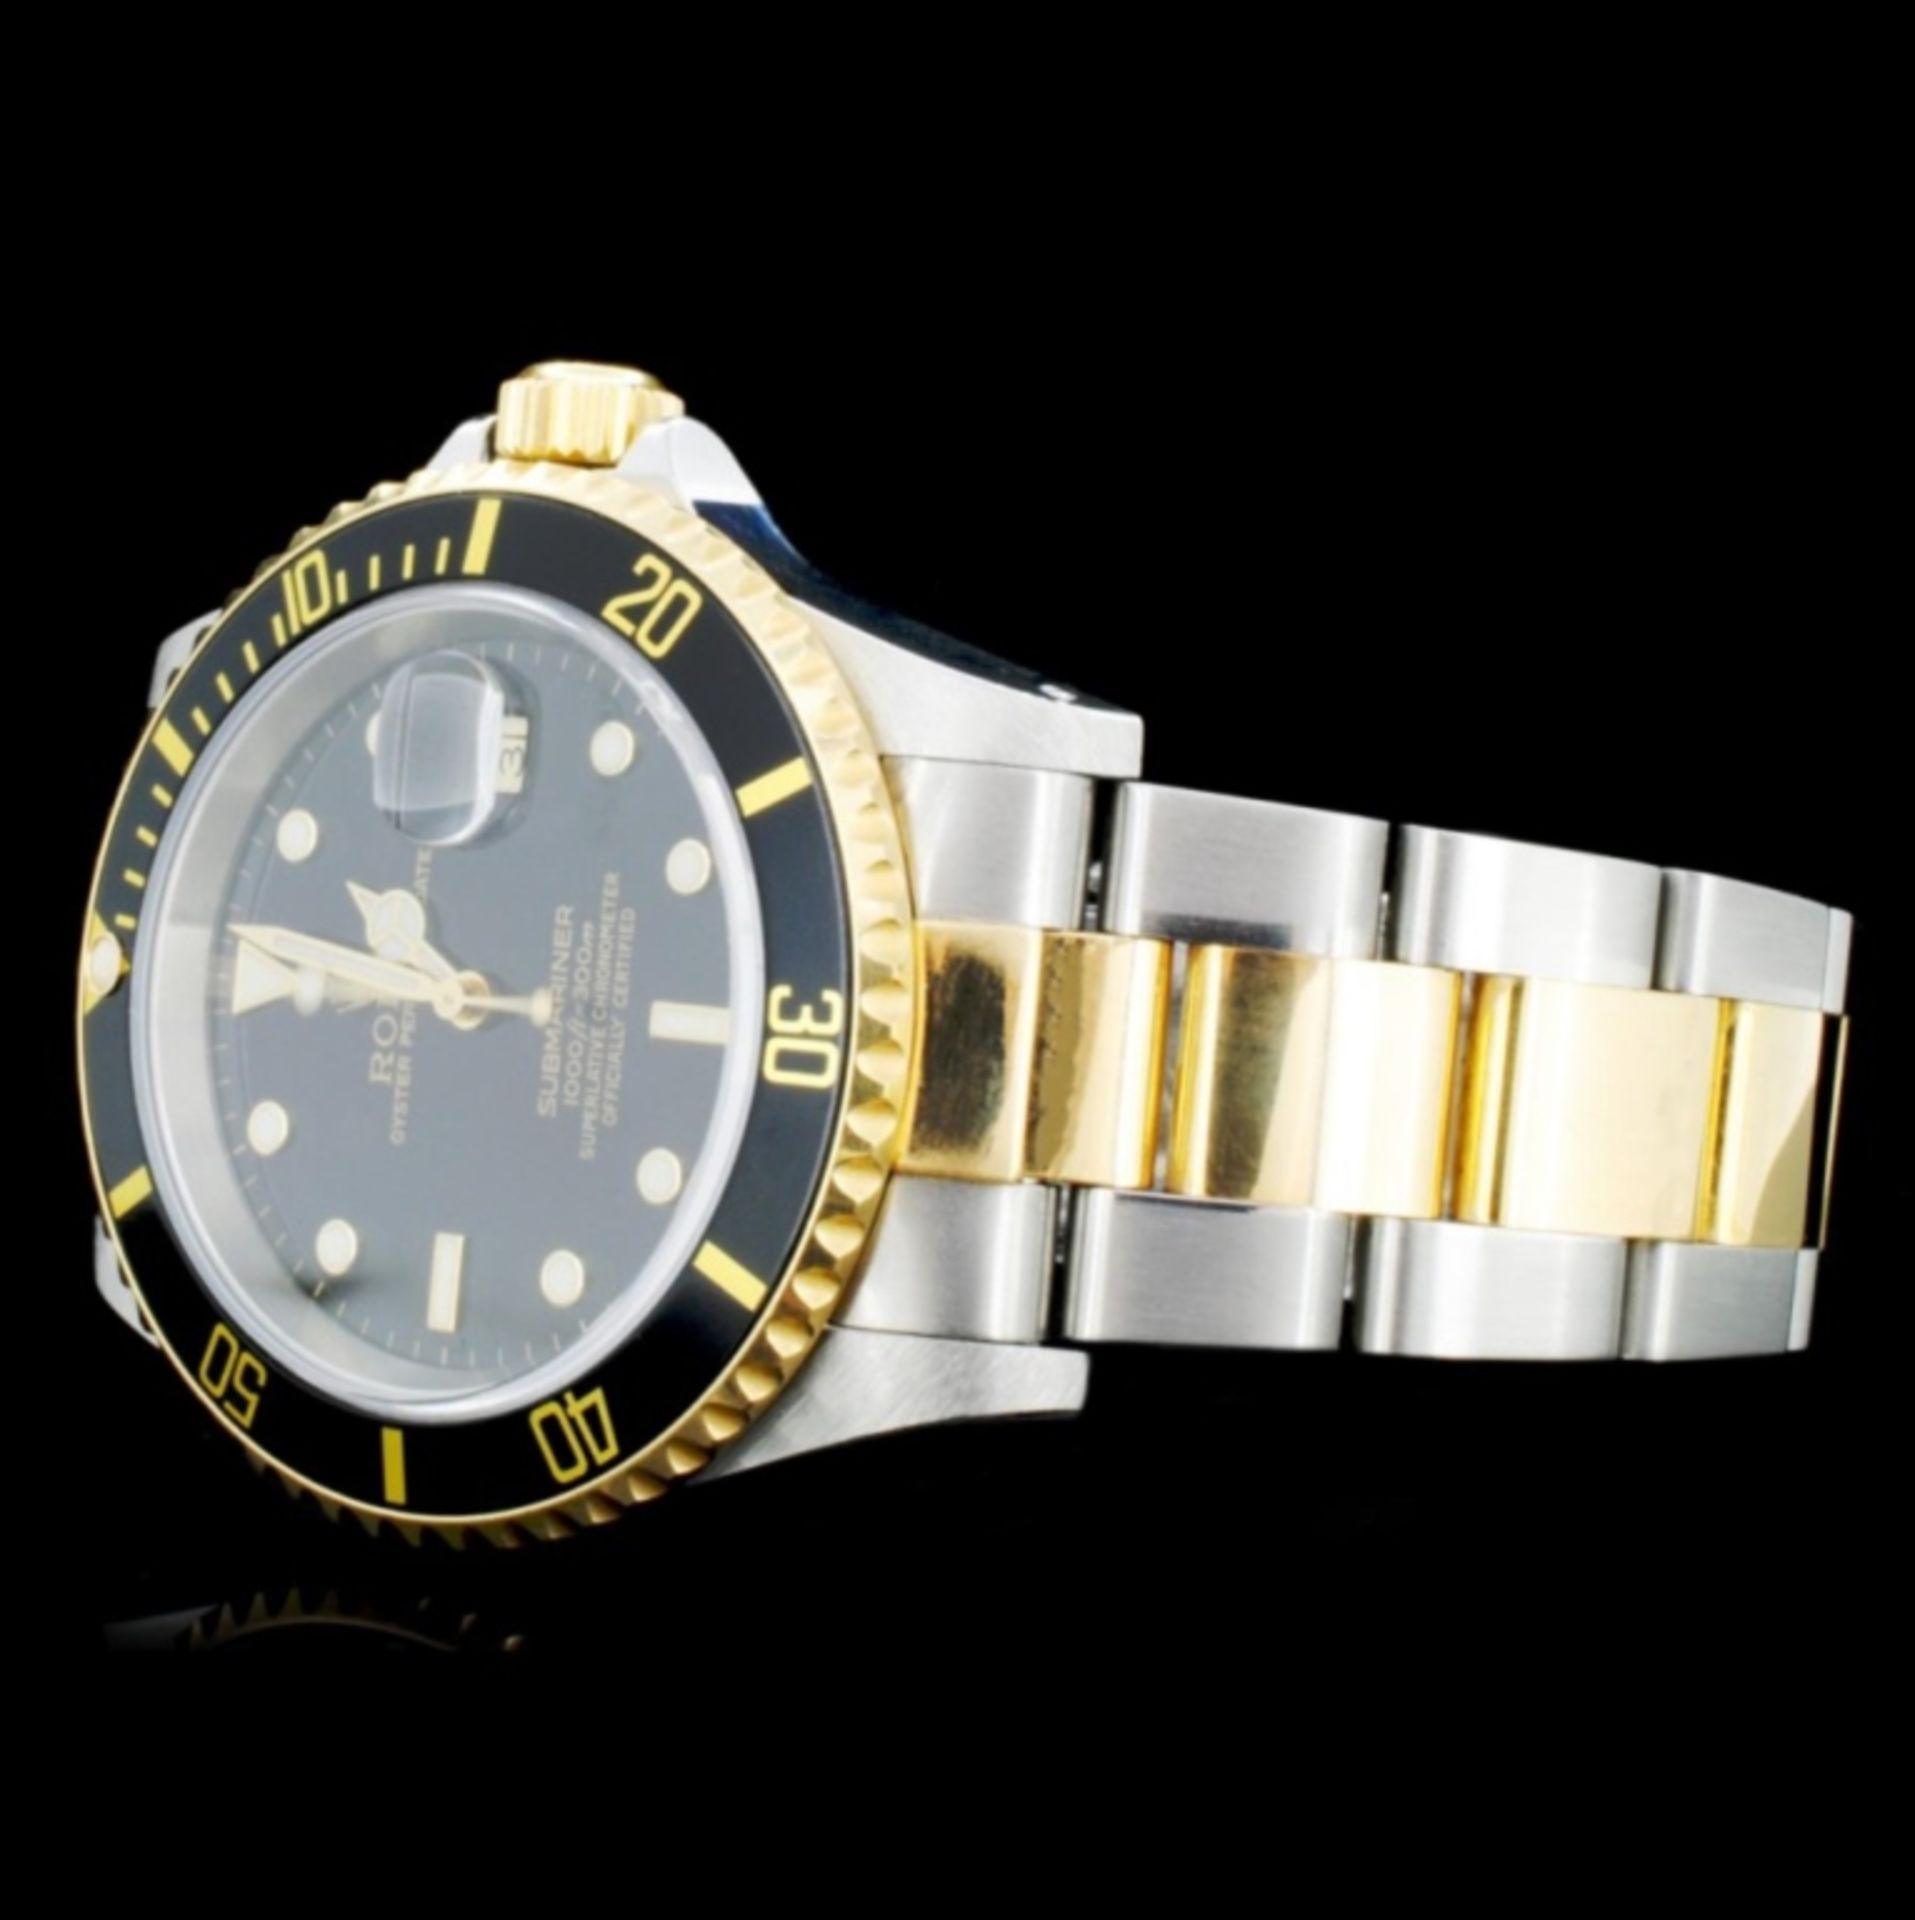 Rolex Submariner 18K & Stainless Steel 40MM Watch - Image 2 of 4